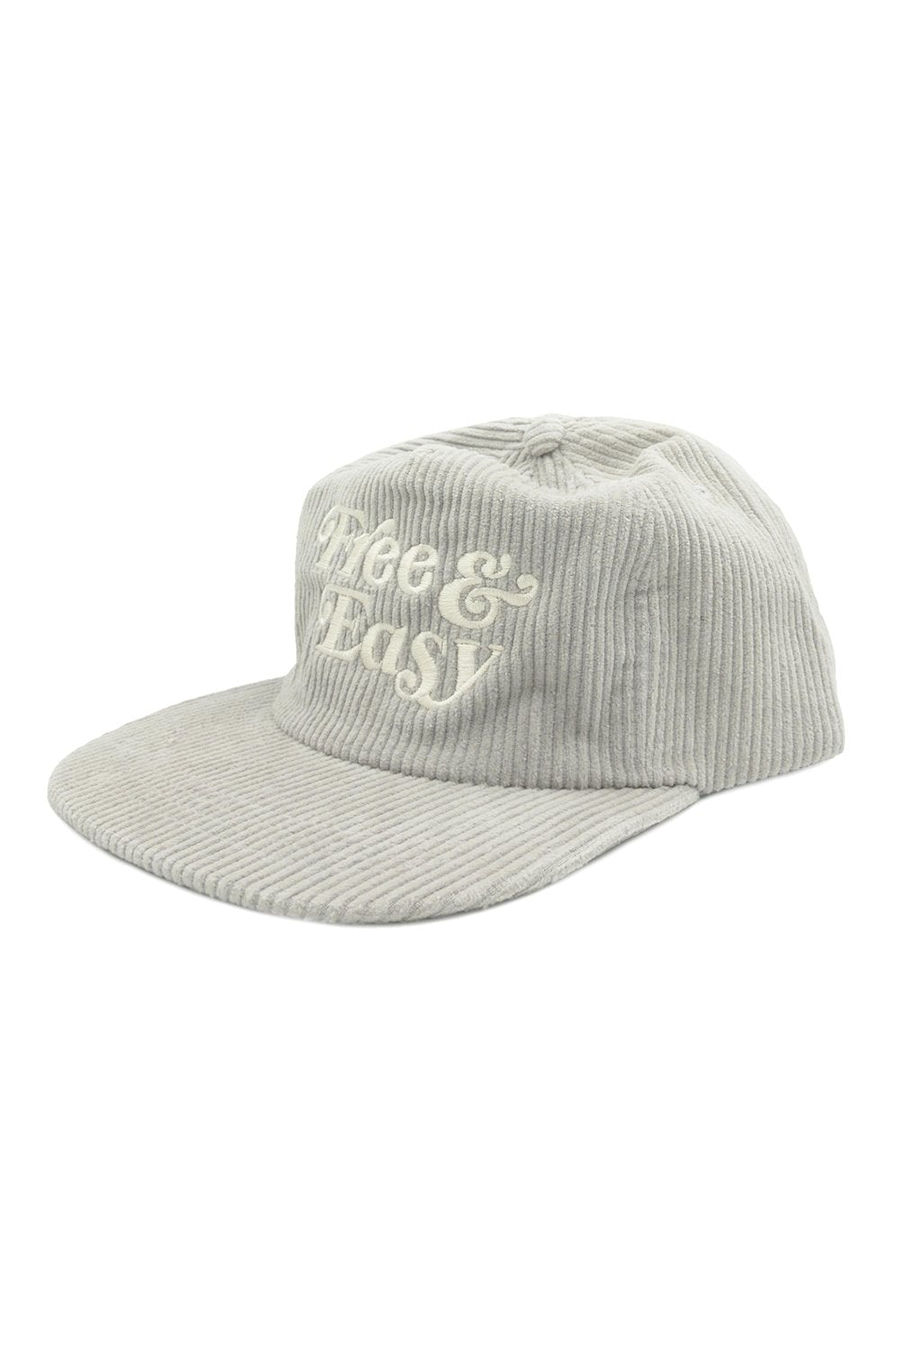 Free & Easy Fat Corduroy Snapback Hat | Light Grey - Main Image Number 1 of 2